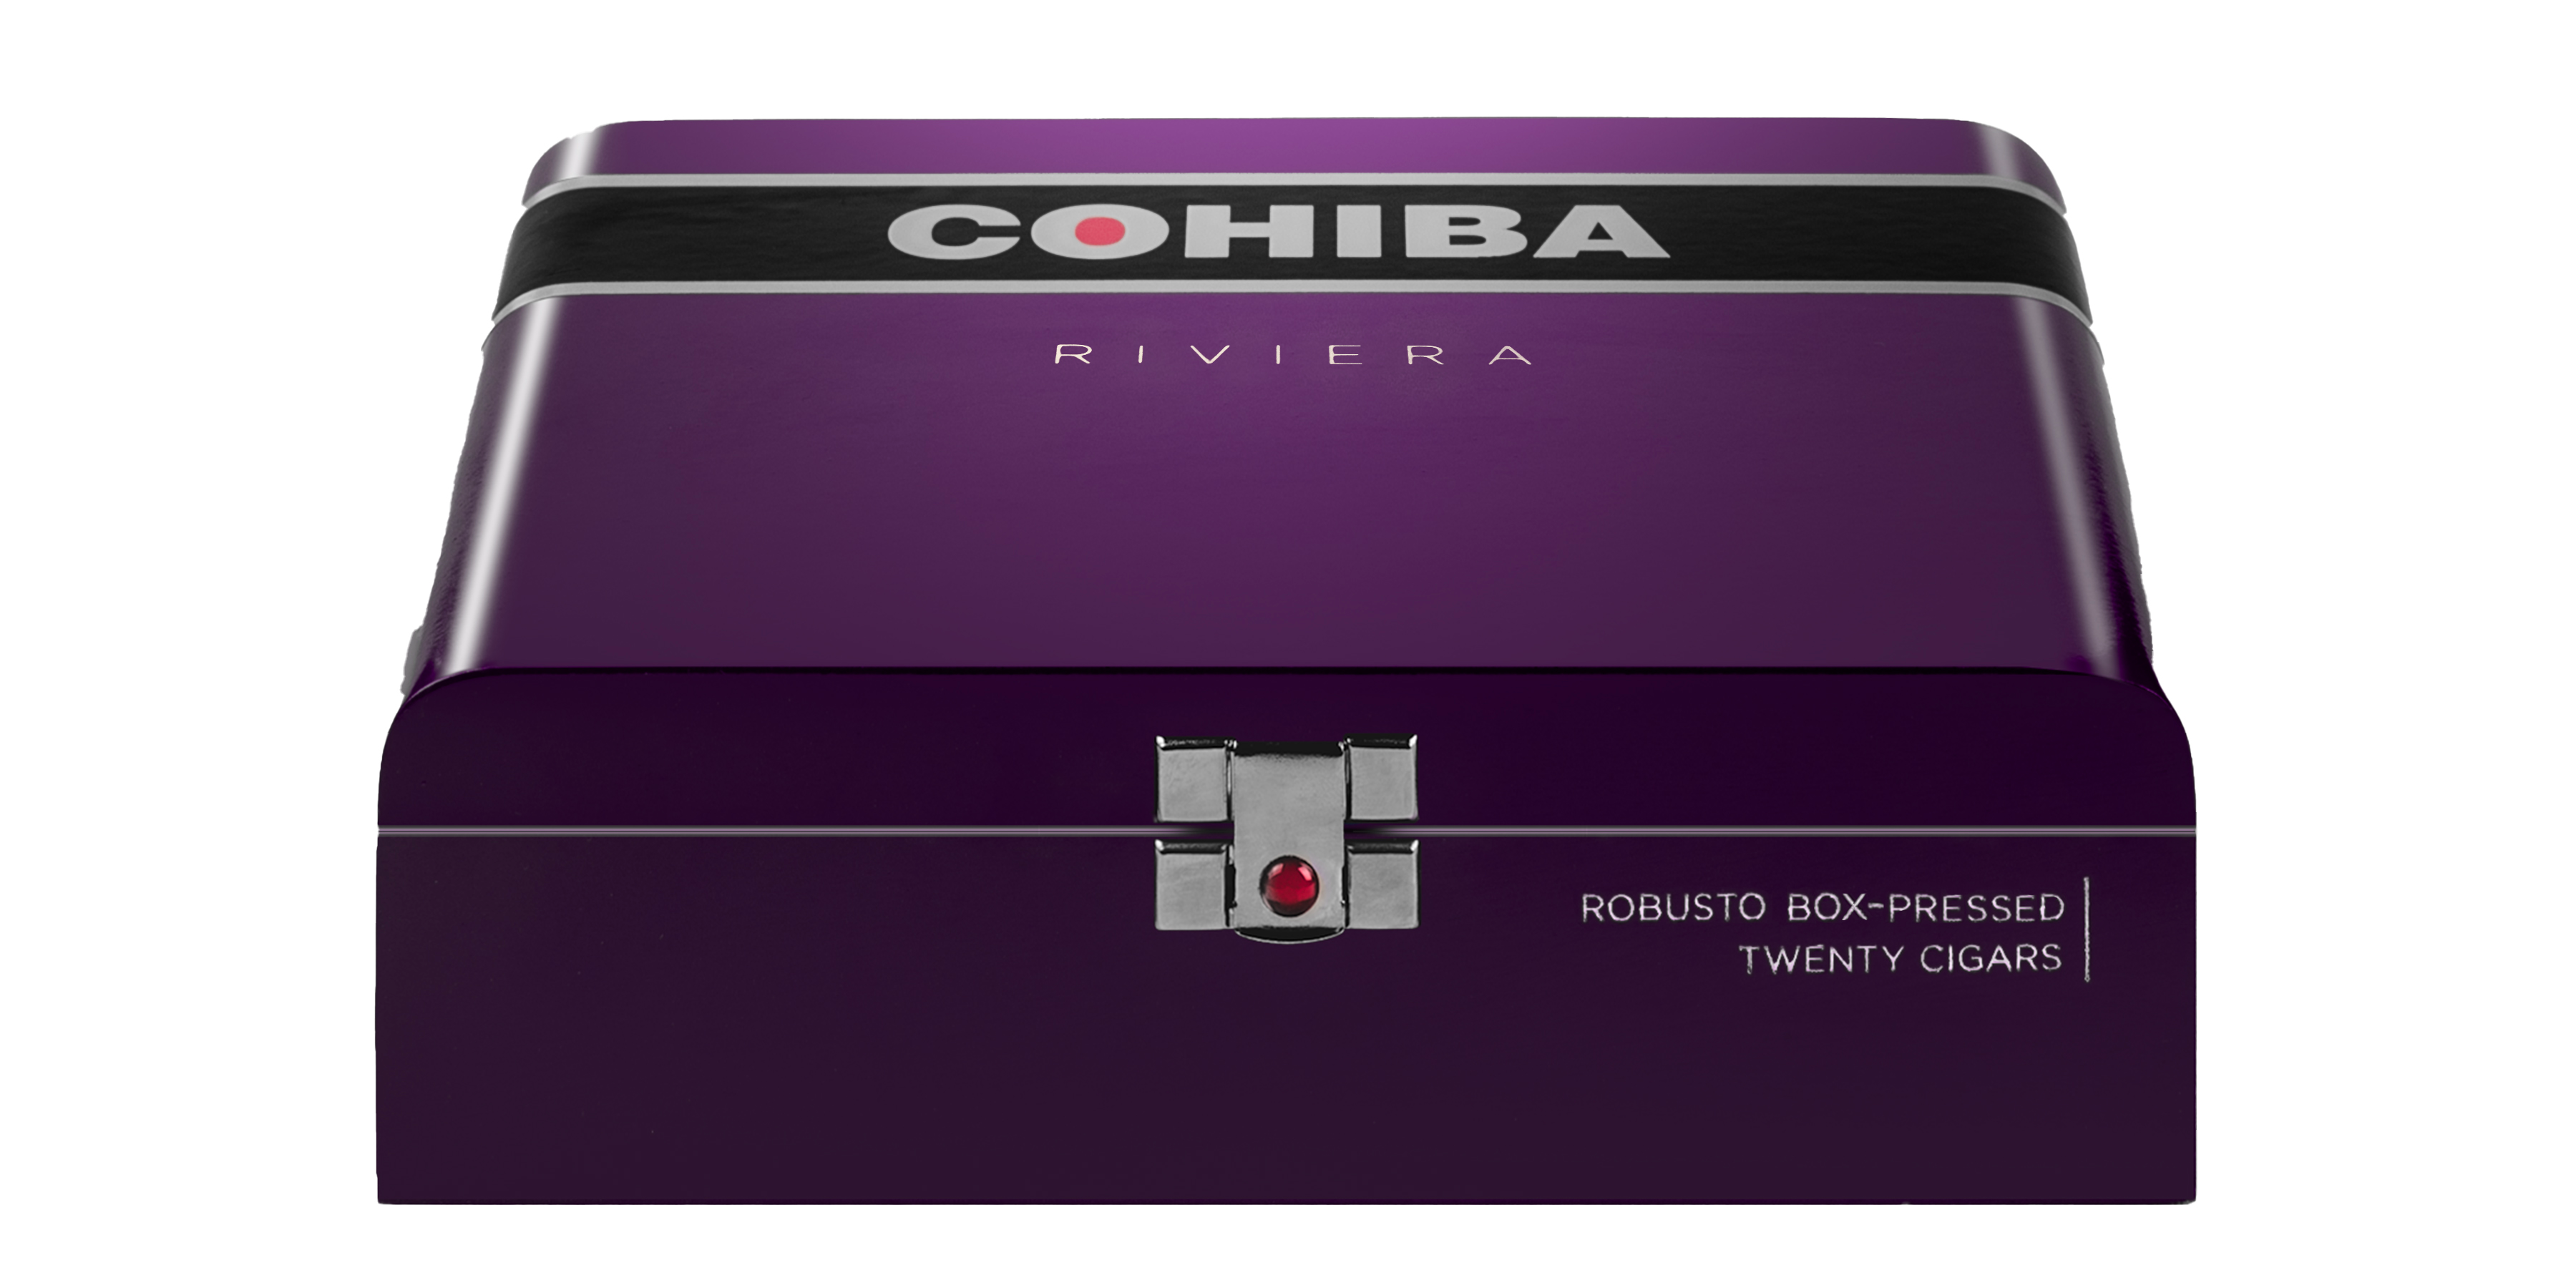 A box of Cohiba Riviera cigars with a dark chocolate wrapper